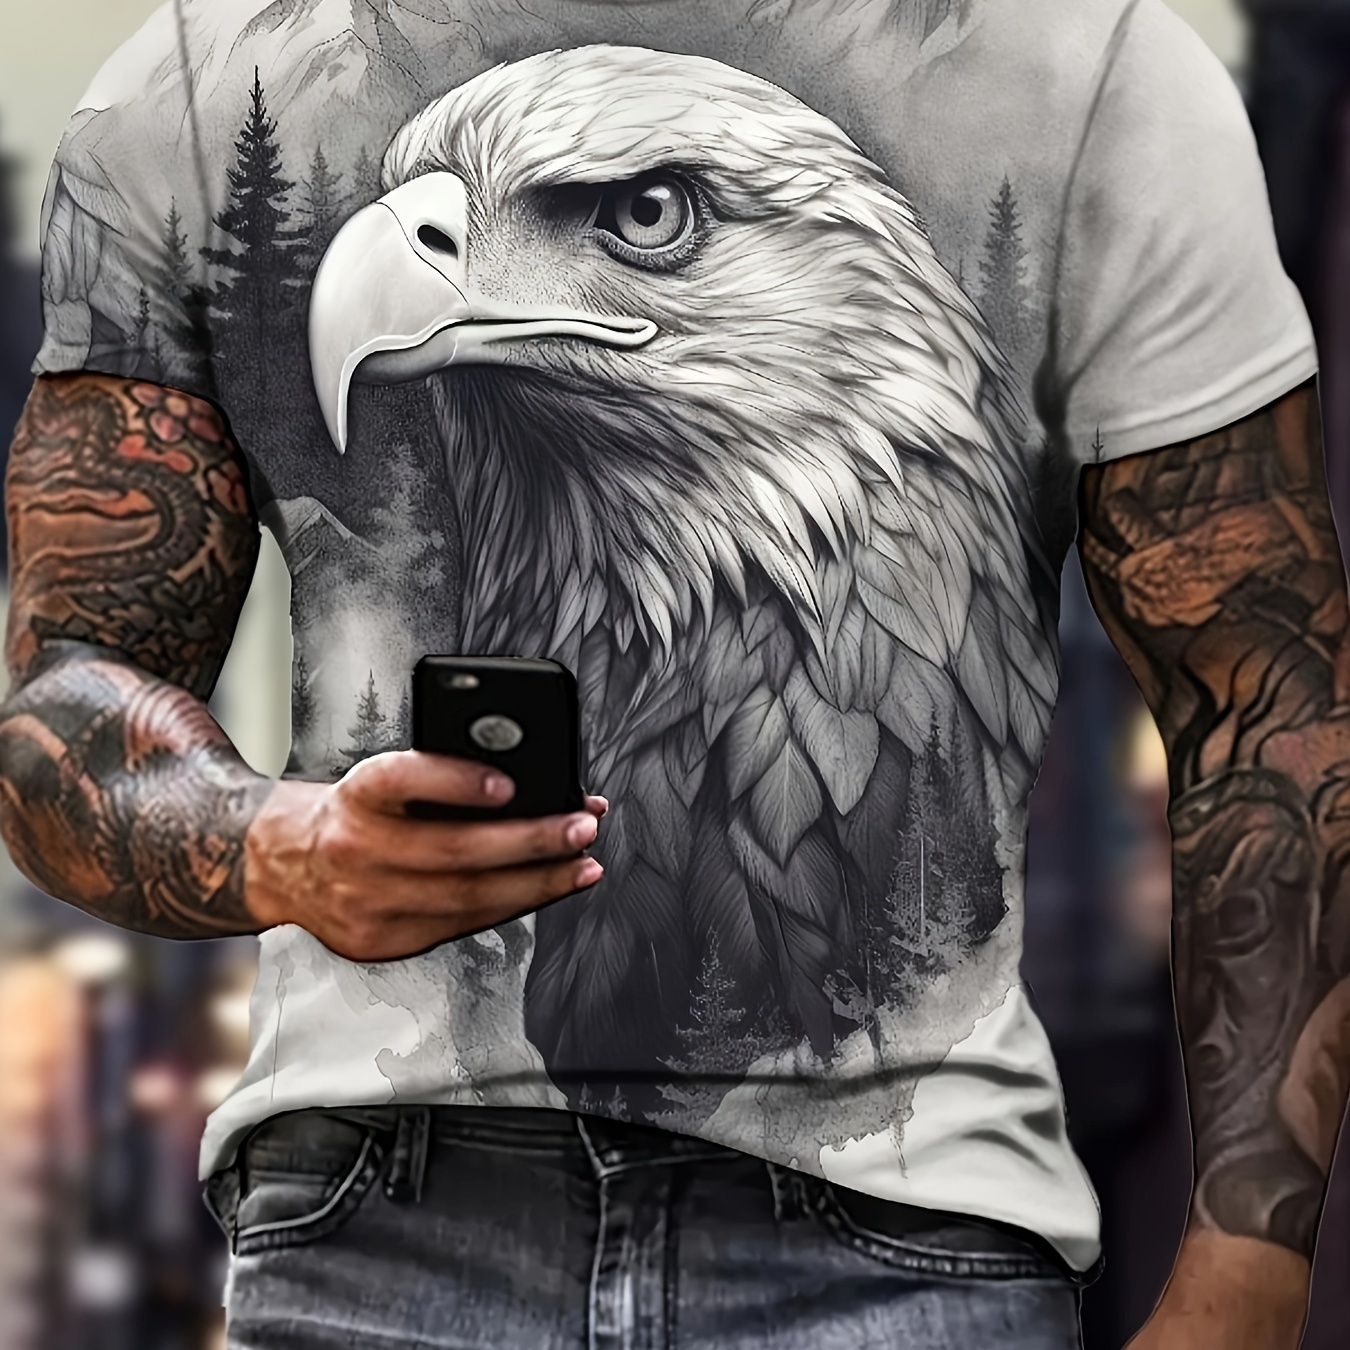 

Eagle Sketch Graphic Pattern T-shirt With Crew Neck And Short Sleeve, Chic And Stylish Tops For Men's Summer Outdoors Wear